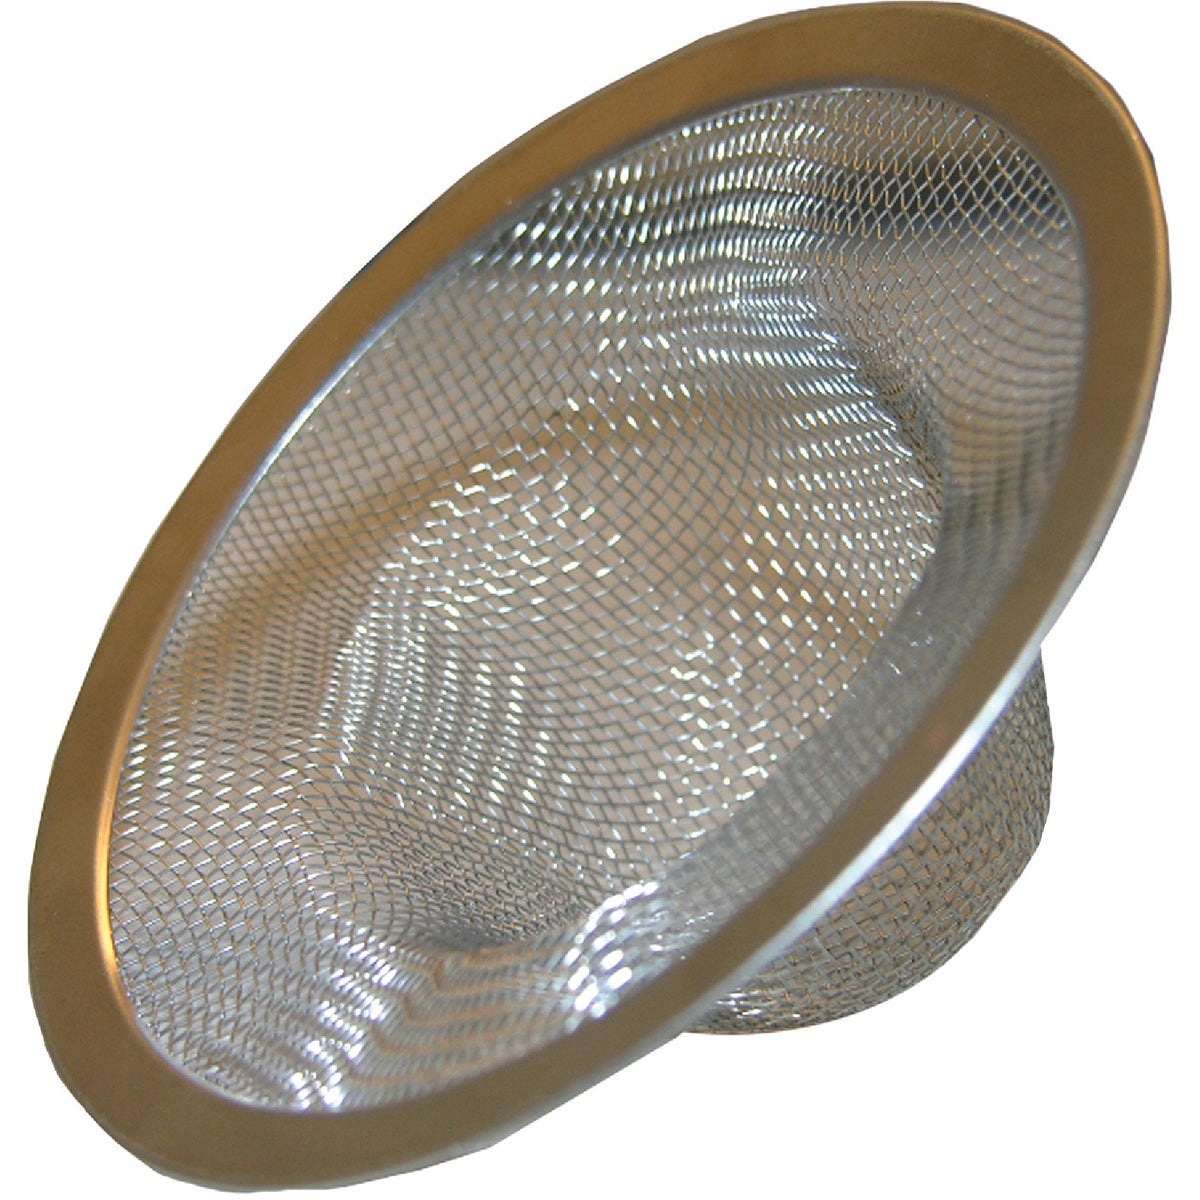 Lasco 3-5/8 In. Stainless Steel Mesh Shower Drain Strainer with Chrome Rim